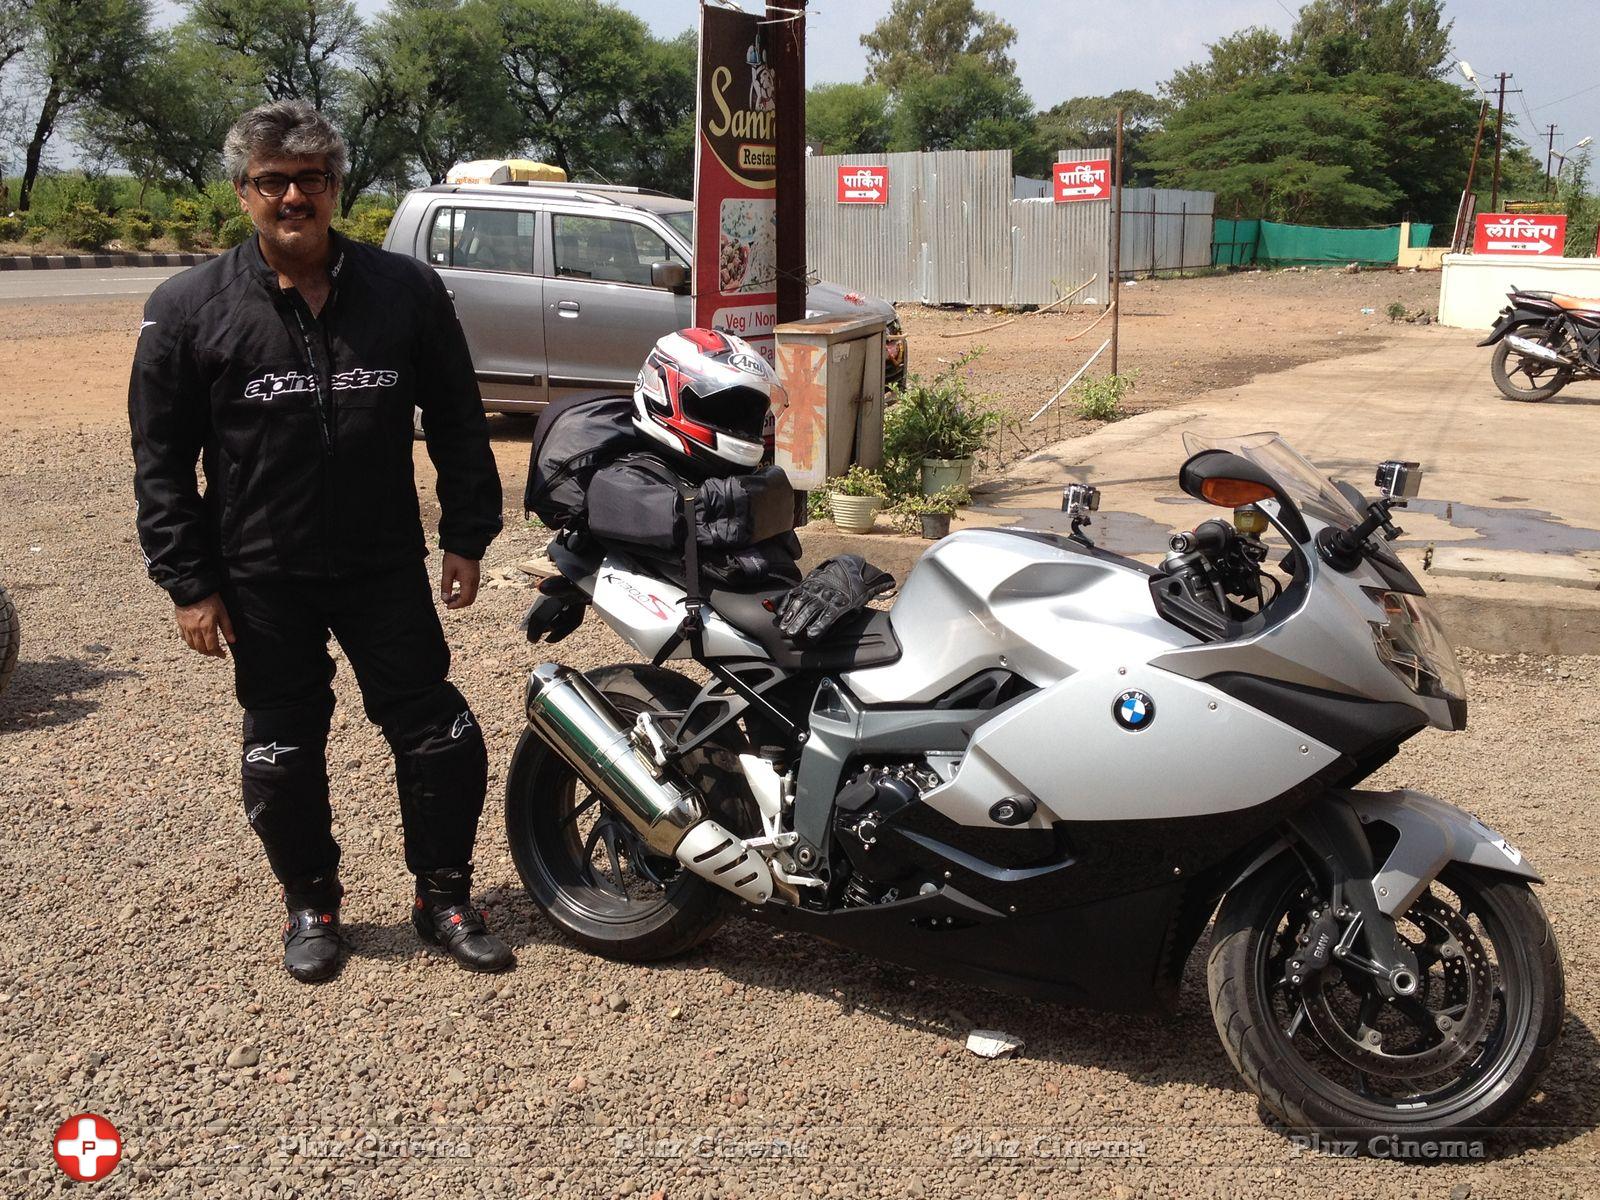 Ajith Kumar trip from Pune to Chennai in BMW K 1300 S bike Photos | Picture 607733